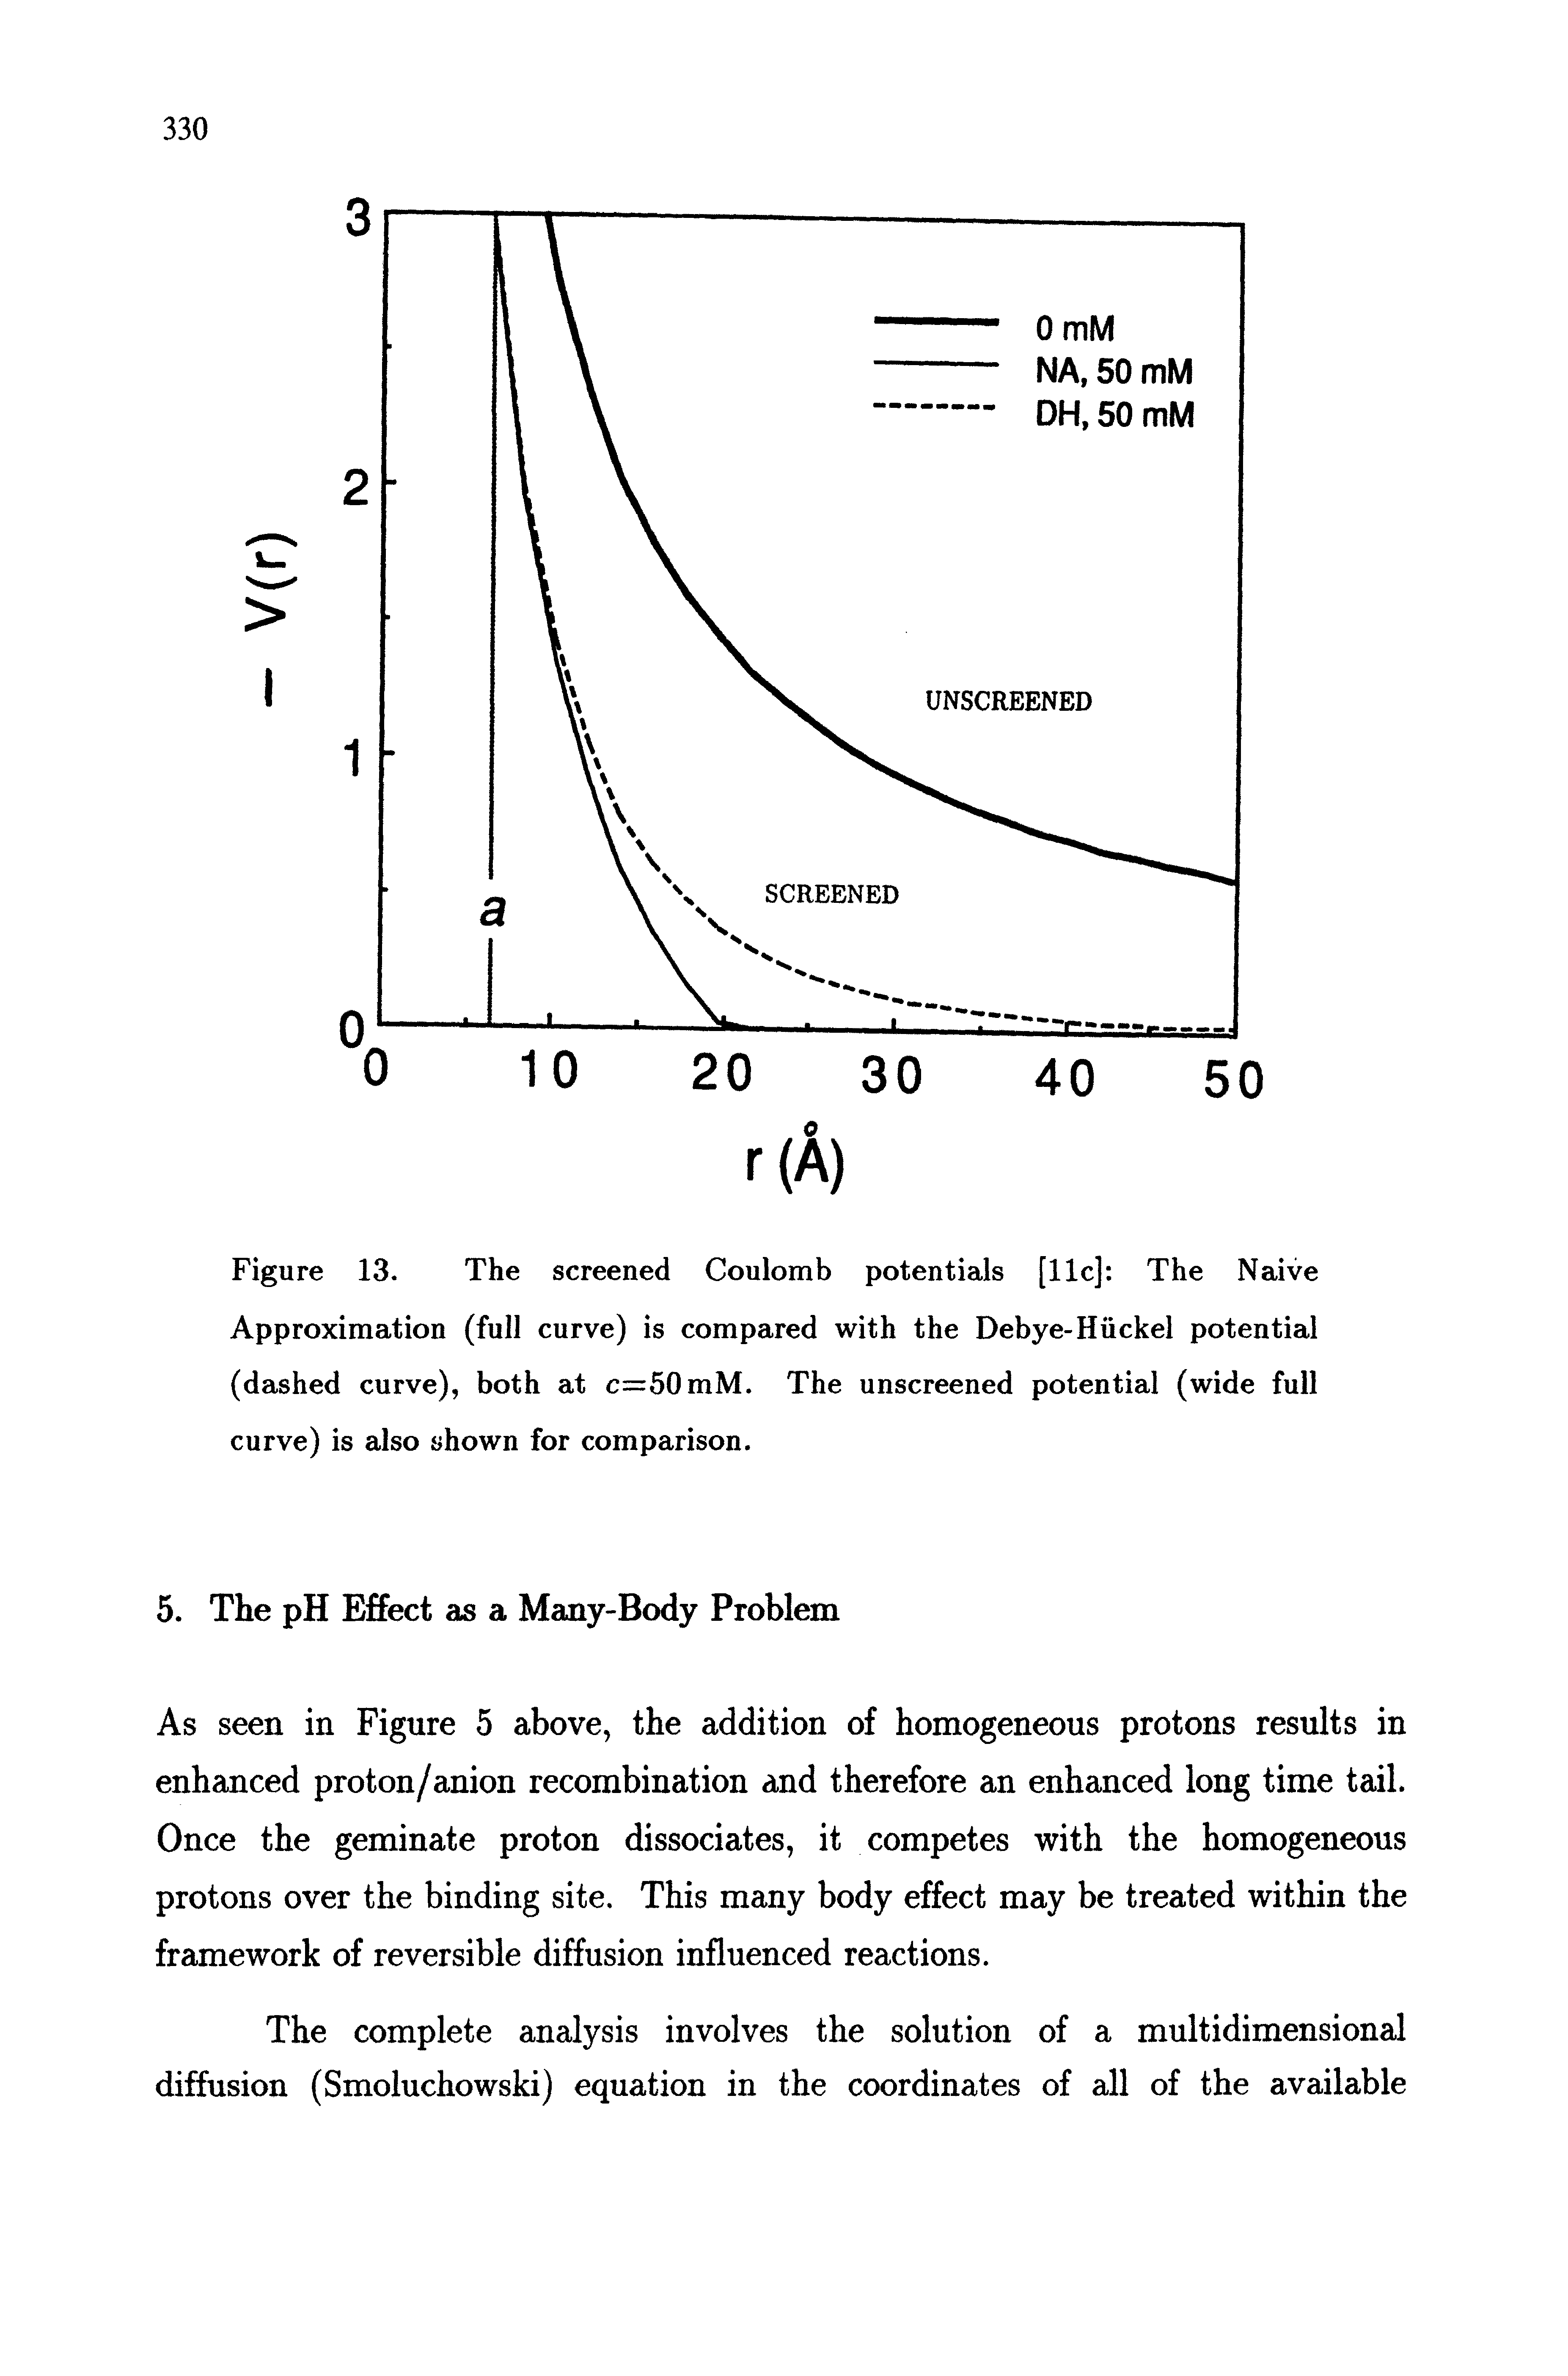 Figure 13. The screened Coulomb potentials [11c] The Naive Approximation (full curve) is compared with the Debye-Hiickel potential (dashed curve), both at c=50mM. The unscreened potential (wide full curve) is also shown for comparison.